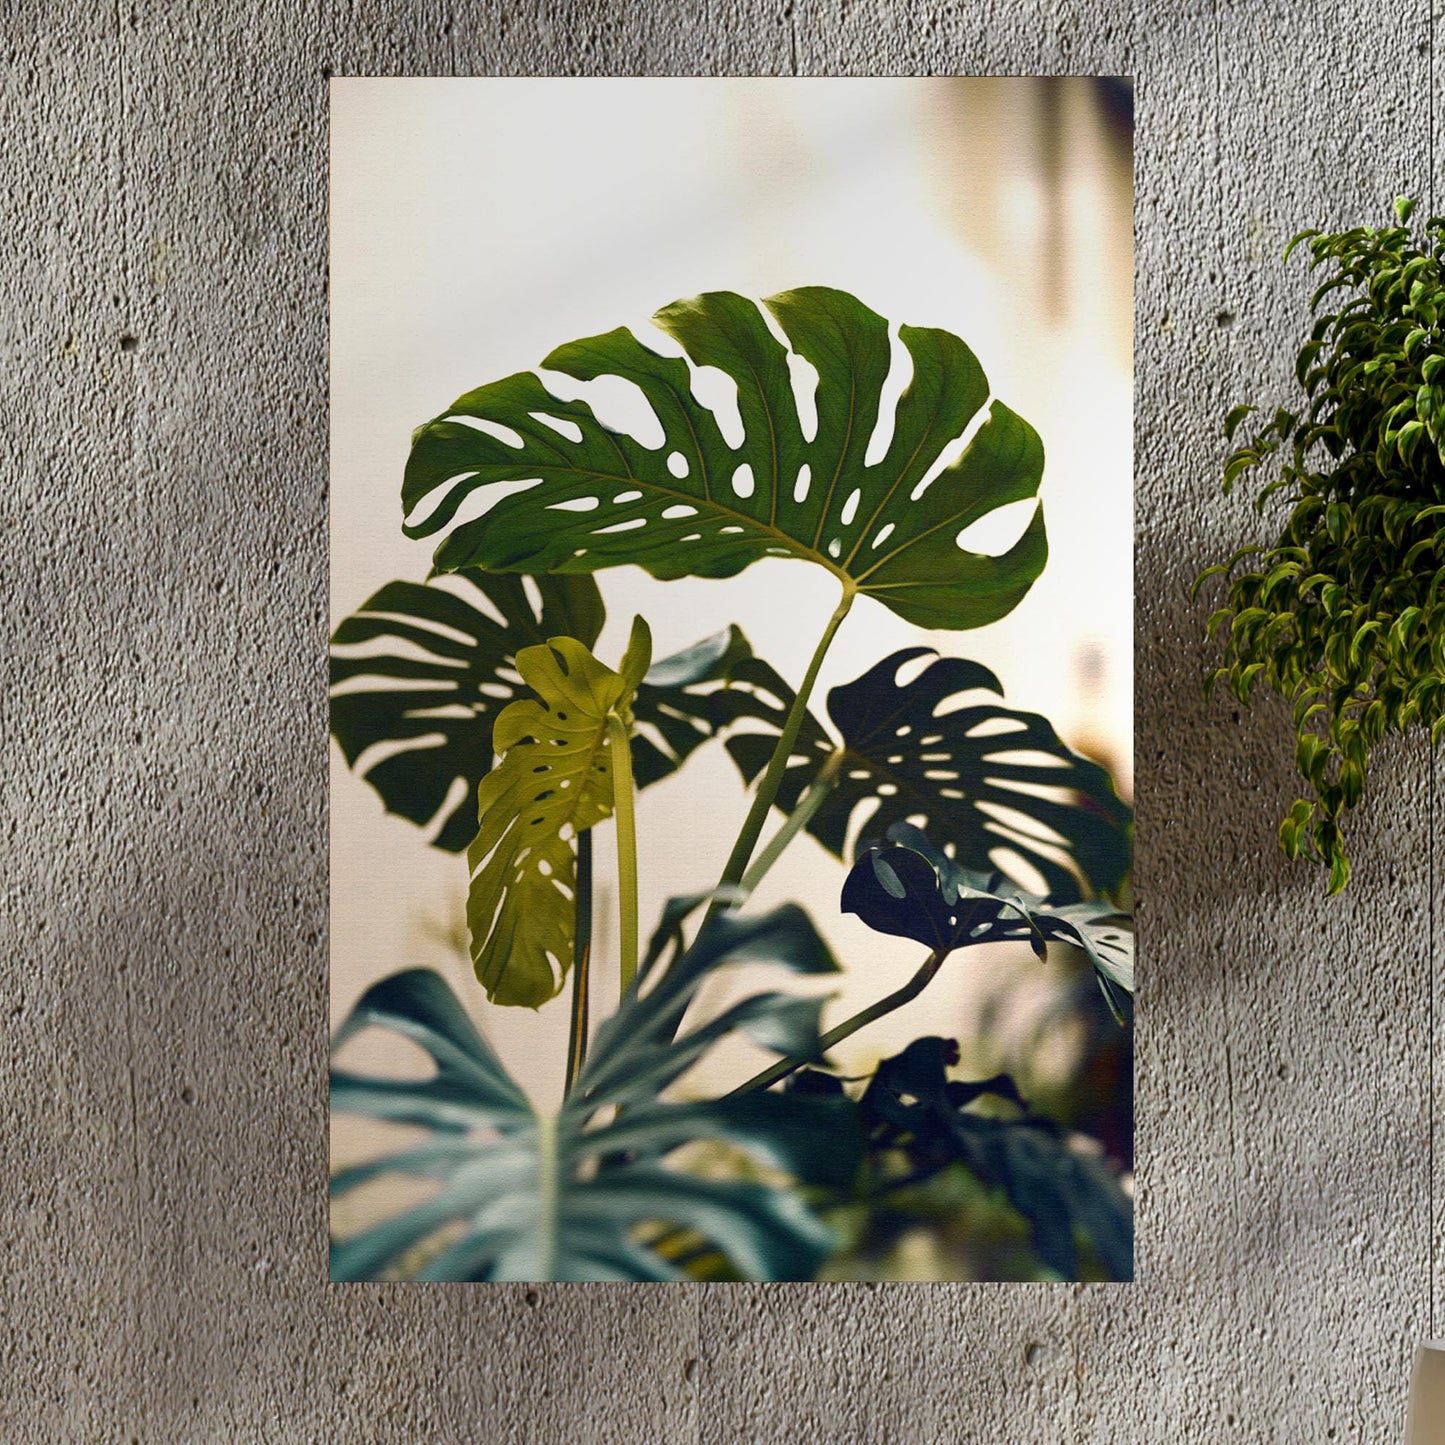 Fresh Tropical Green Leaves Canvas Wall Art - Image by Tailored Canvases